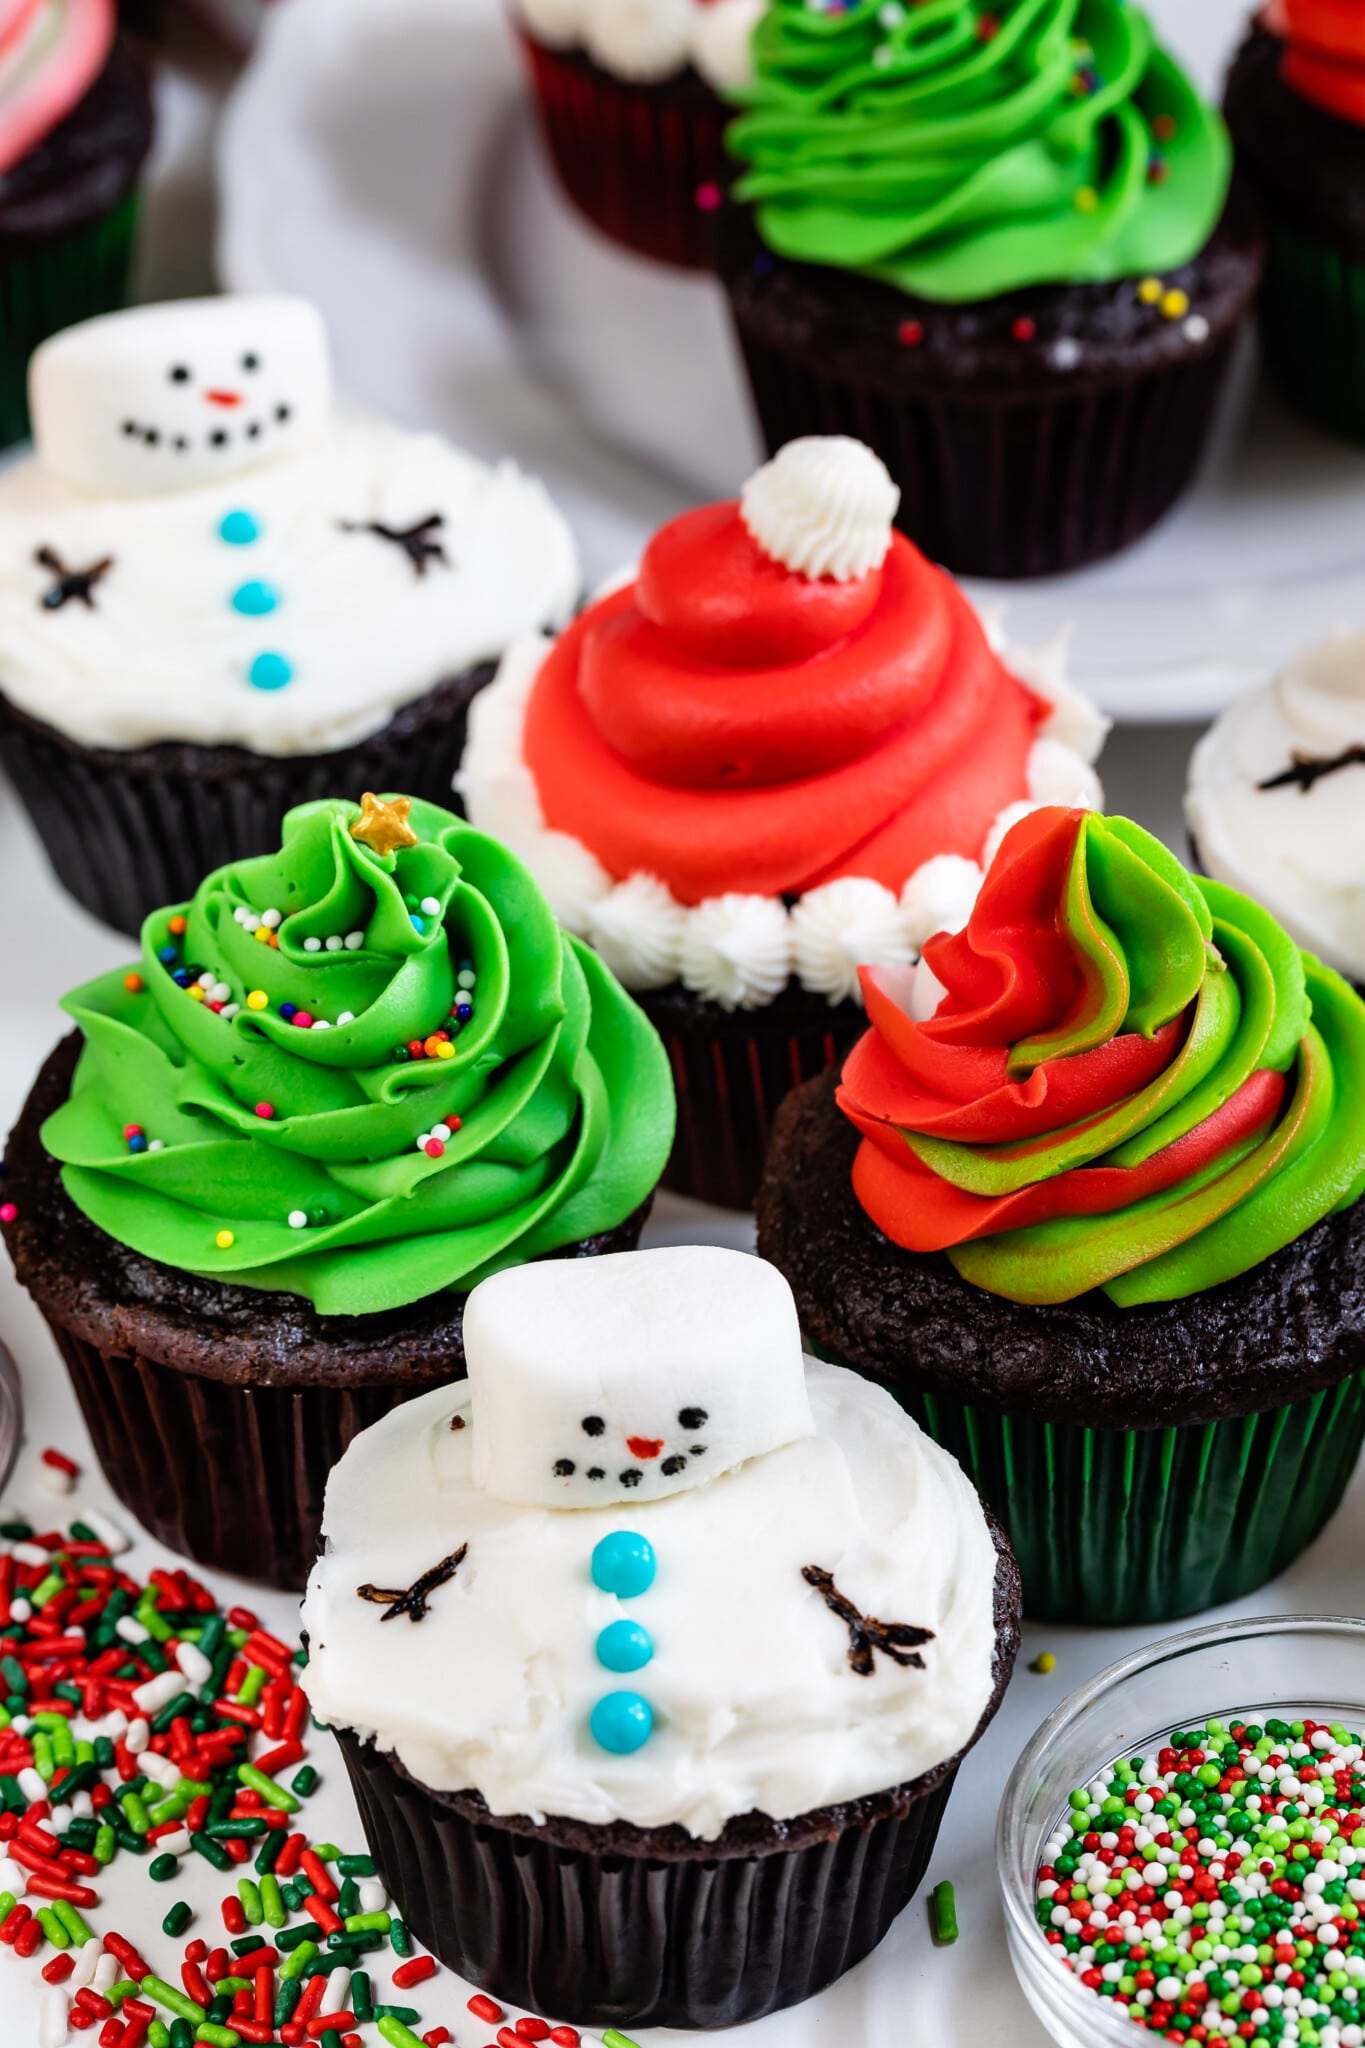 4 cupcakes decorated for christmas: snowman, Santa, swirled frosting, tree